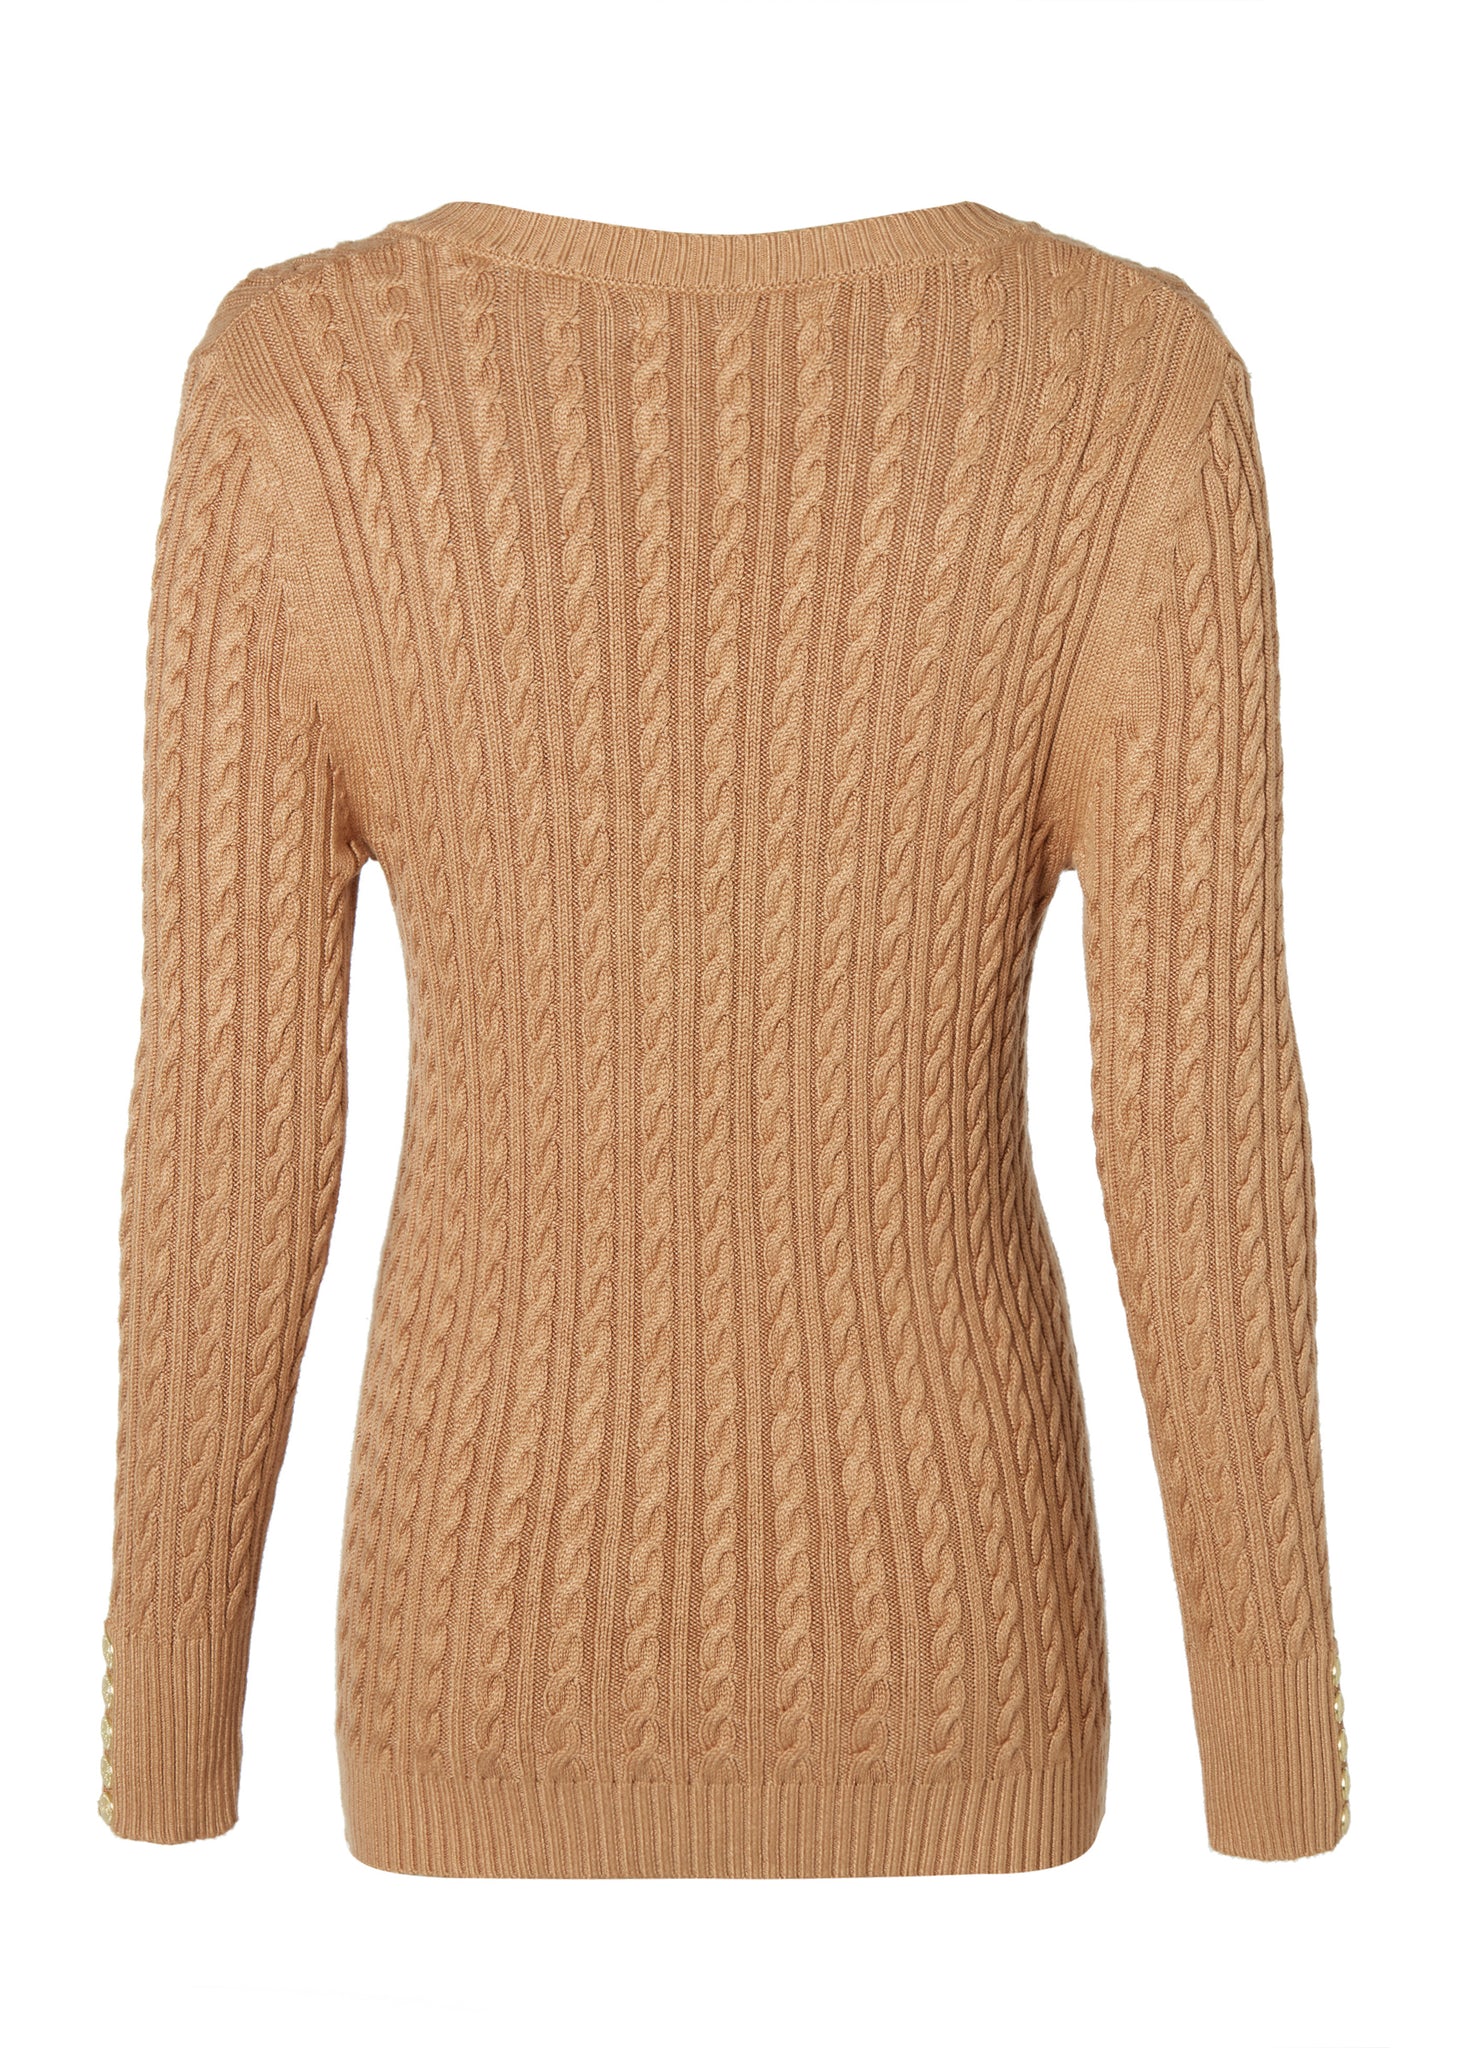 back of womens lightweight v neck cable knit jumper in dark caramel detailed with gold buttons at the cuffs